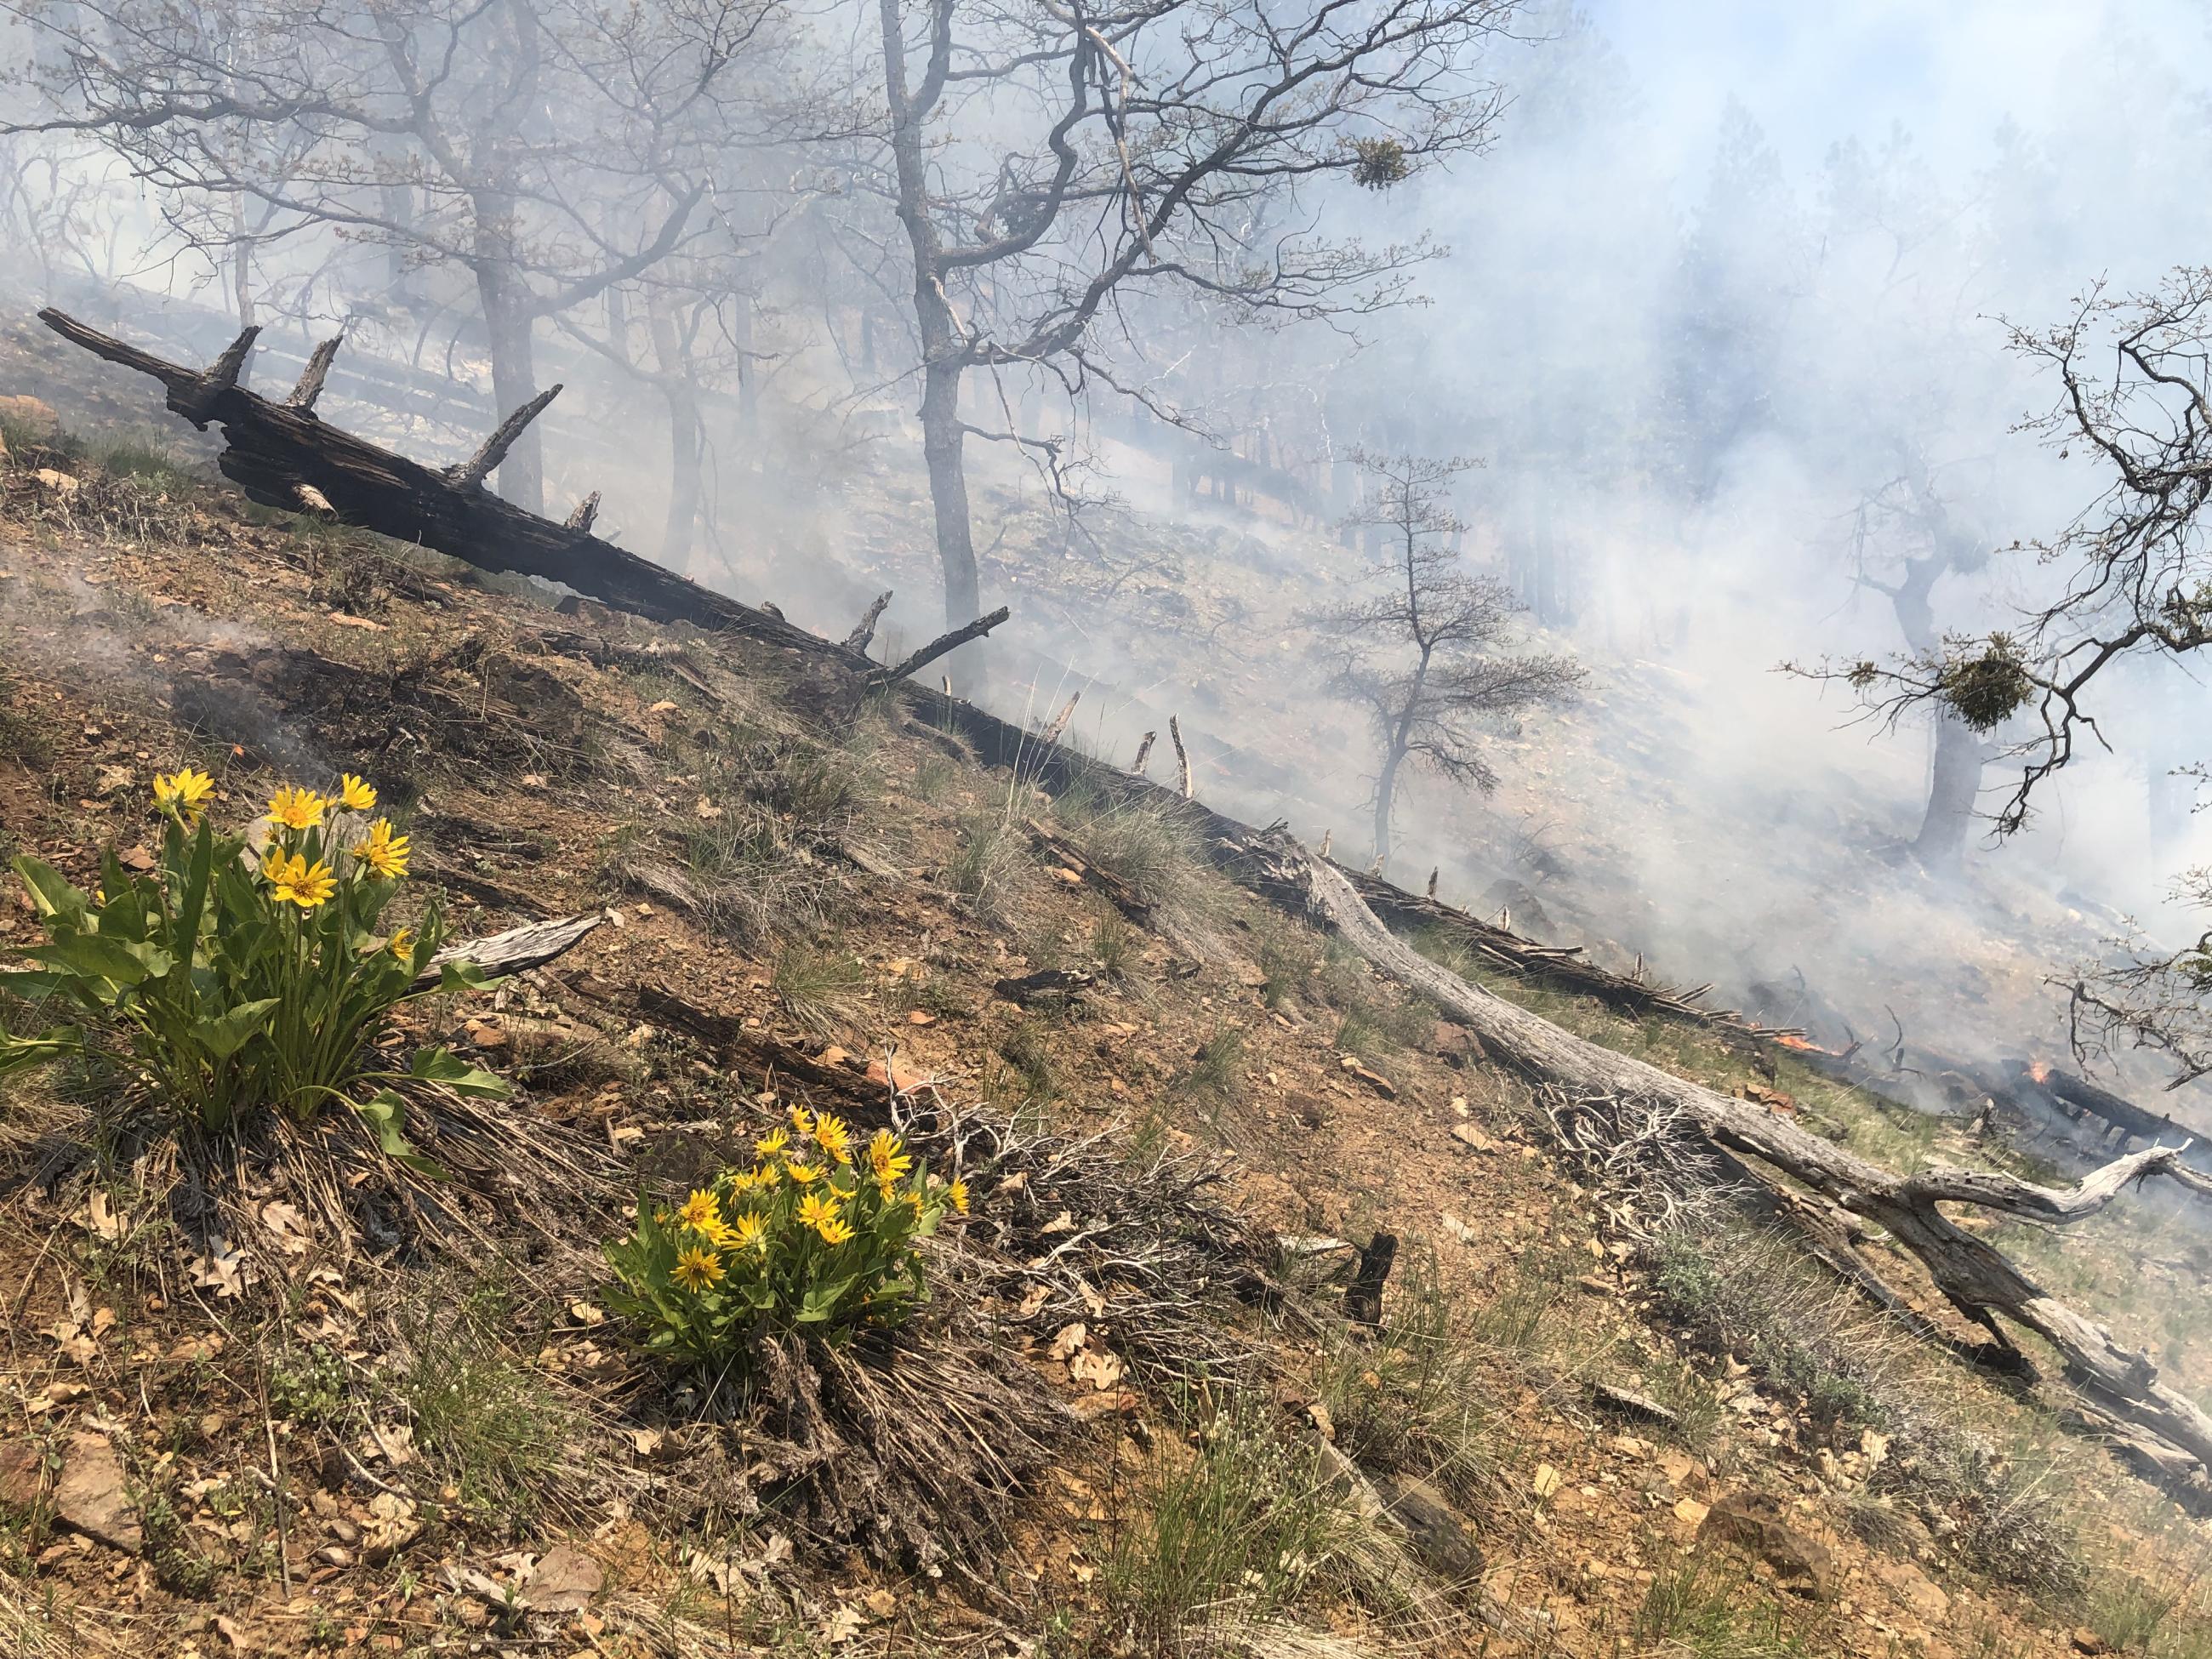 Yellow flowers with prescribed fire smoke in the background